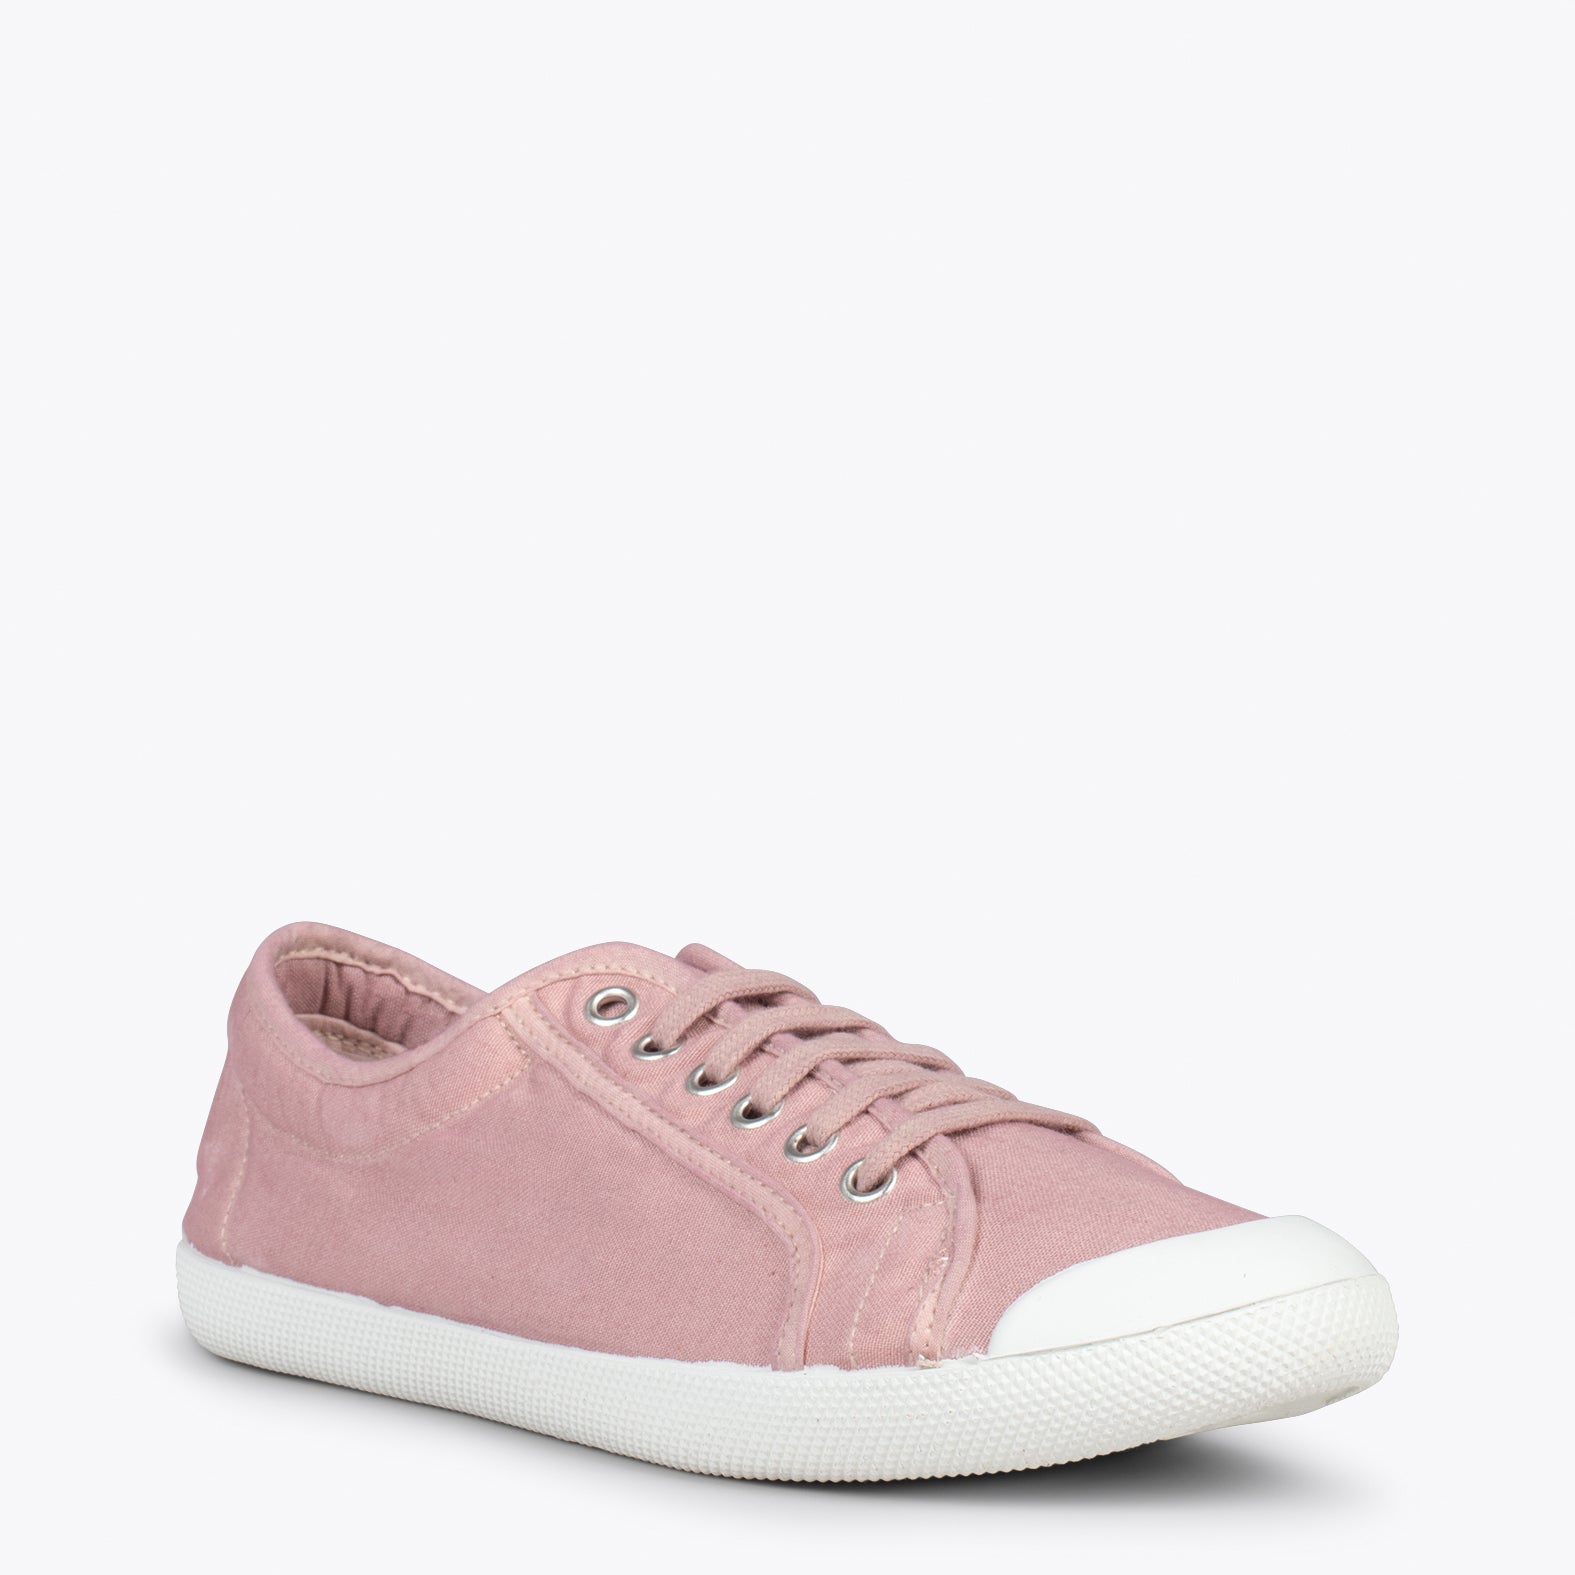 BAOBAB – PINK BCI cotton sneakers from IO&GO